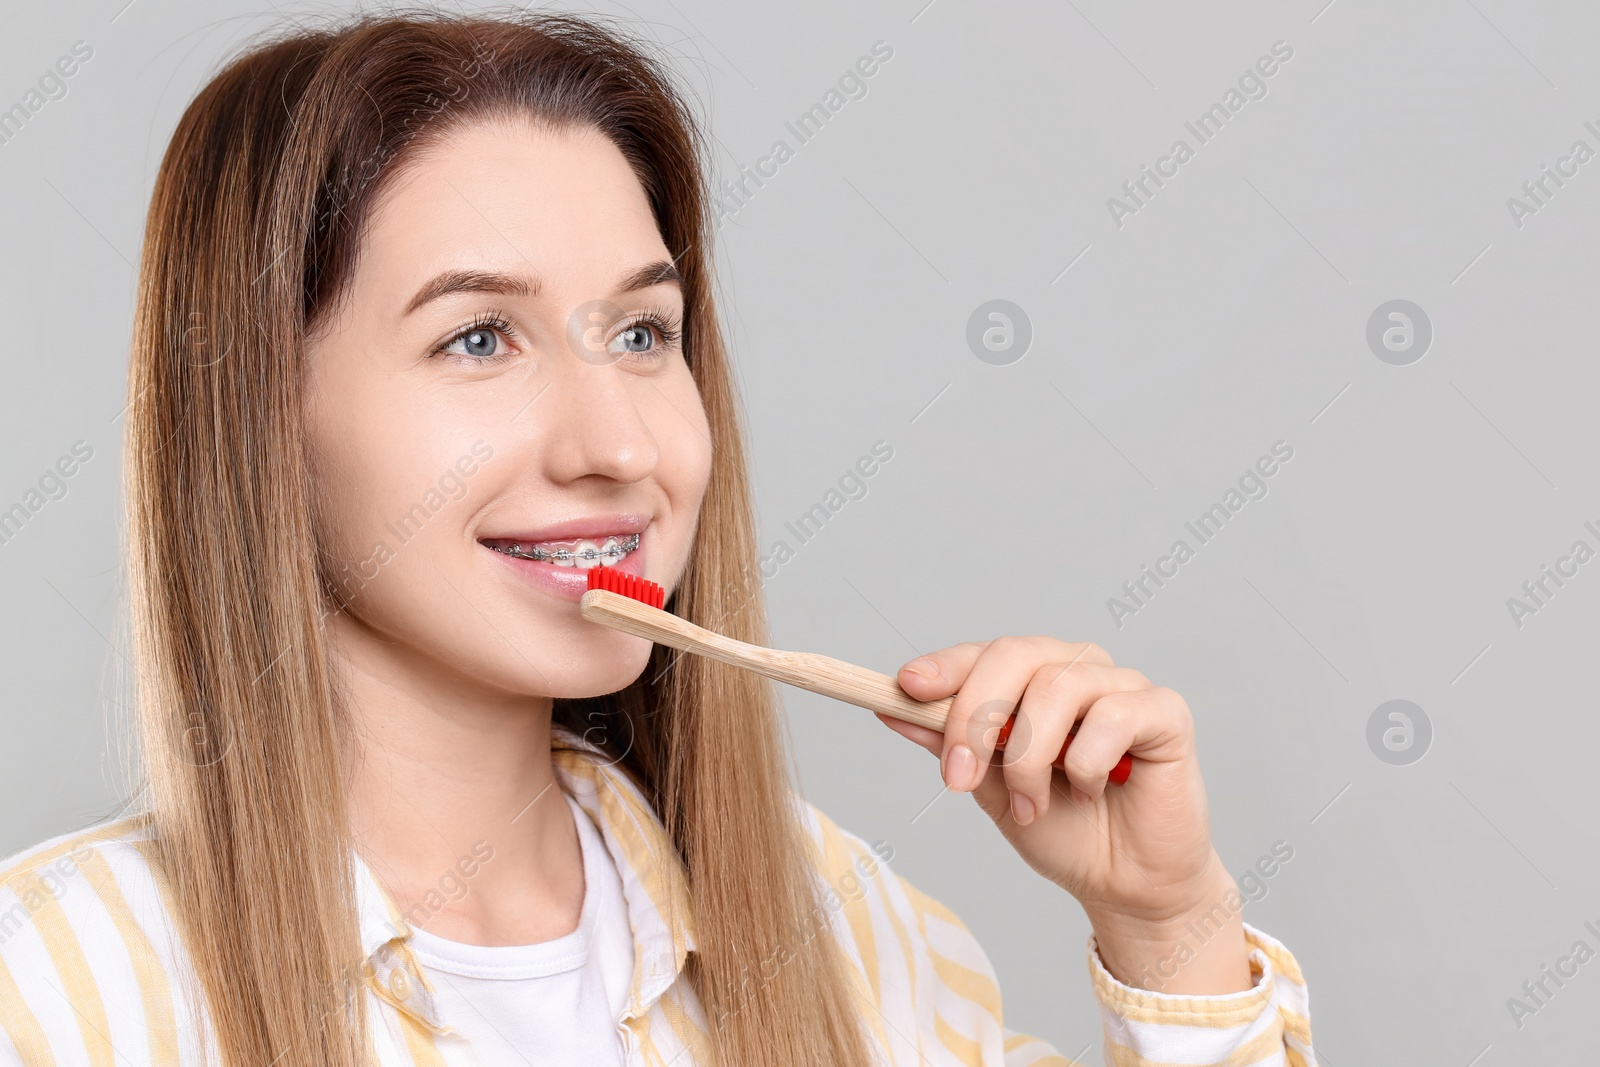 Photo of Smiling woman with dental braces cleaning teeth on grey background. Space for text